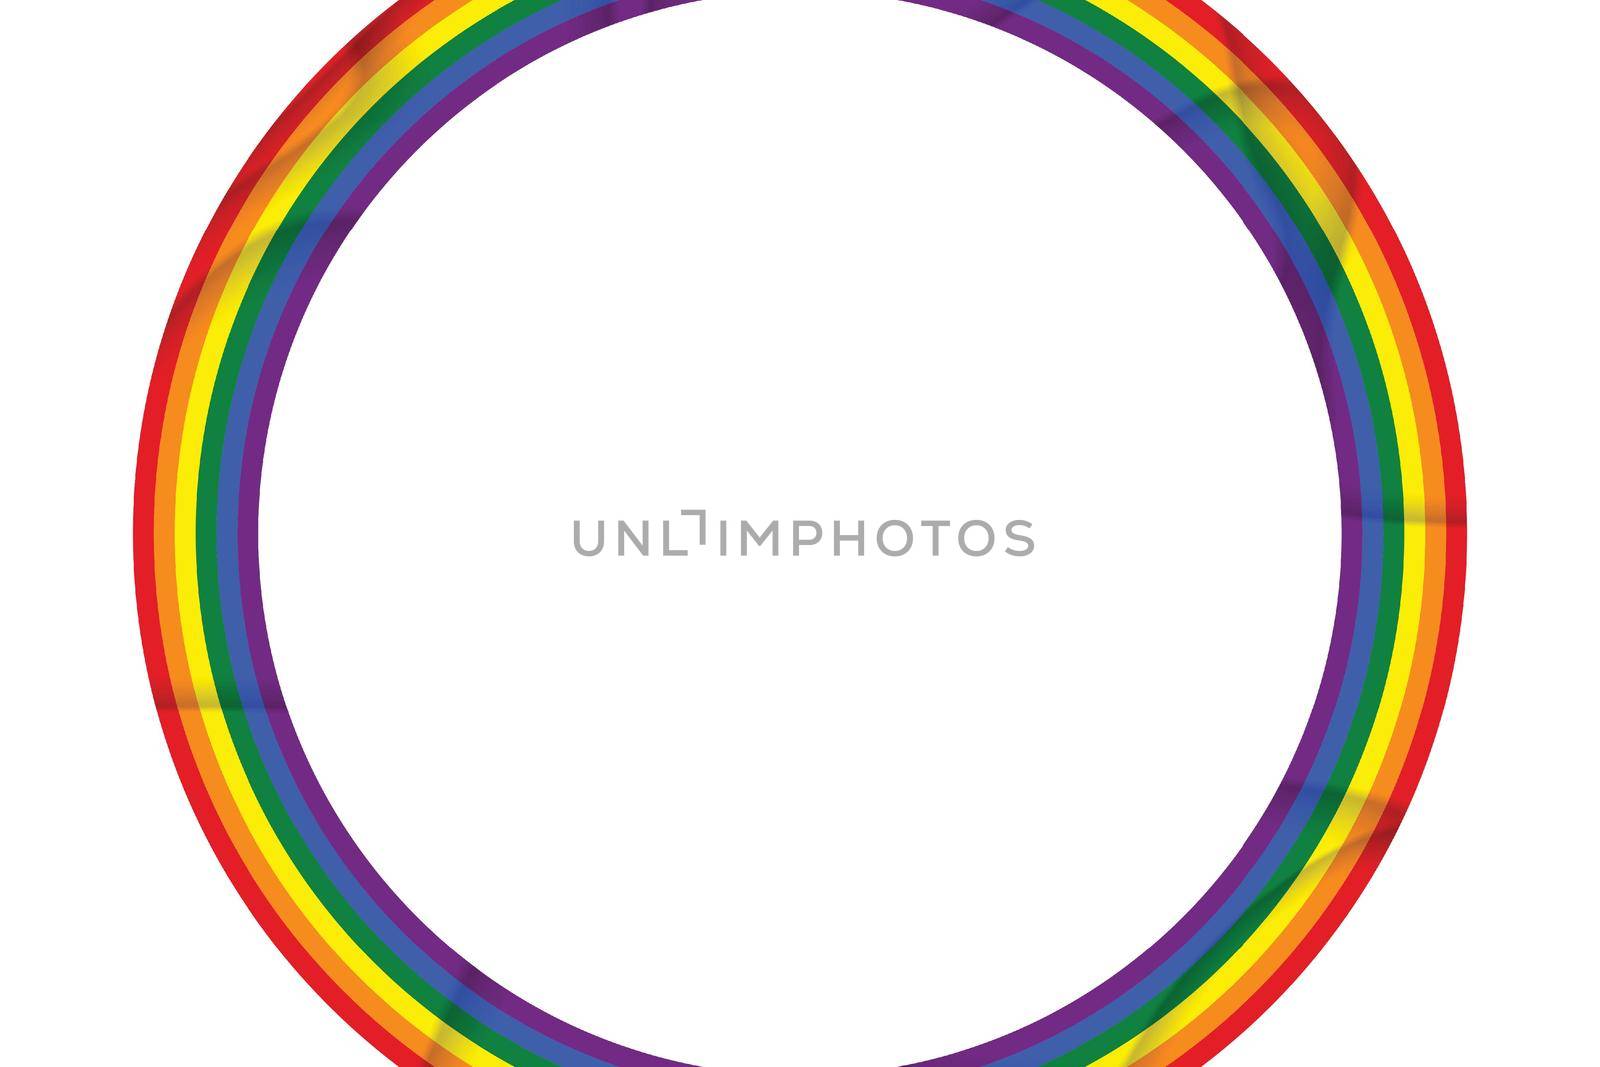 Flag LGBT icon, round frame. Template design, vector illustration. Love wins. LGBT symbol in rainbow colors. Gay pride collection.